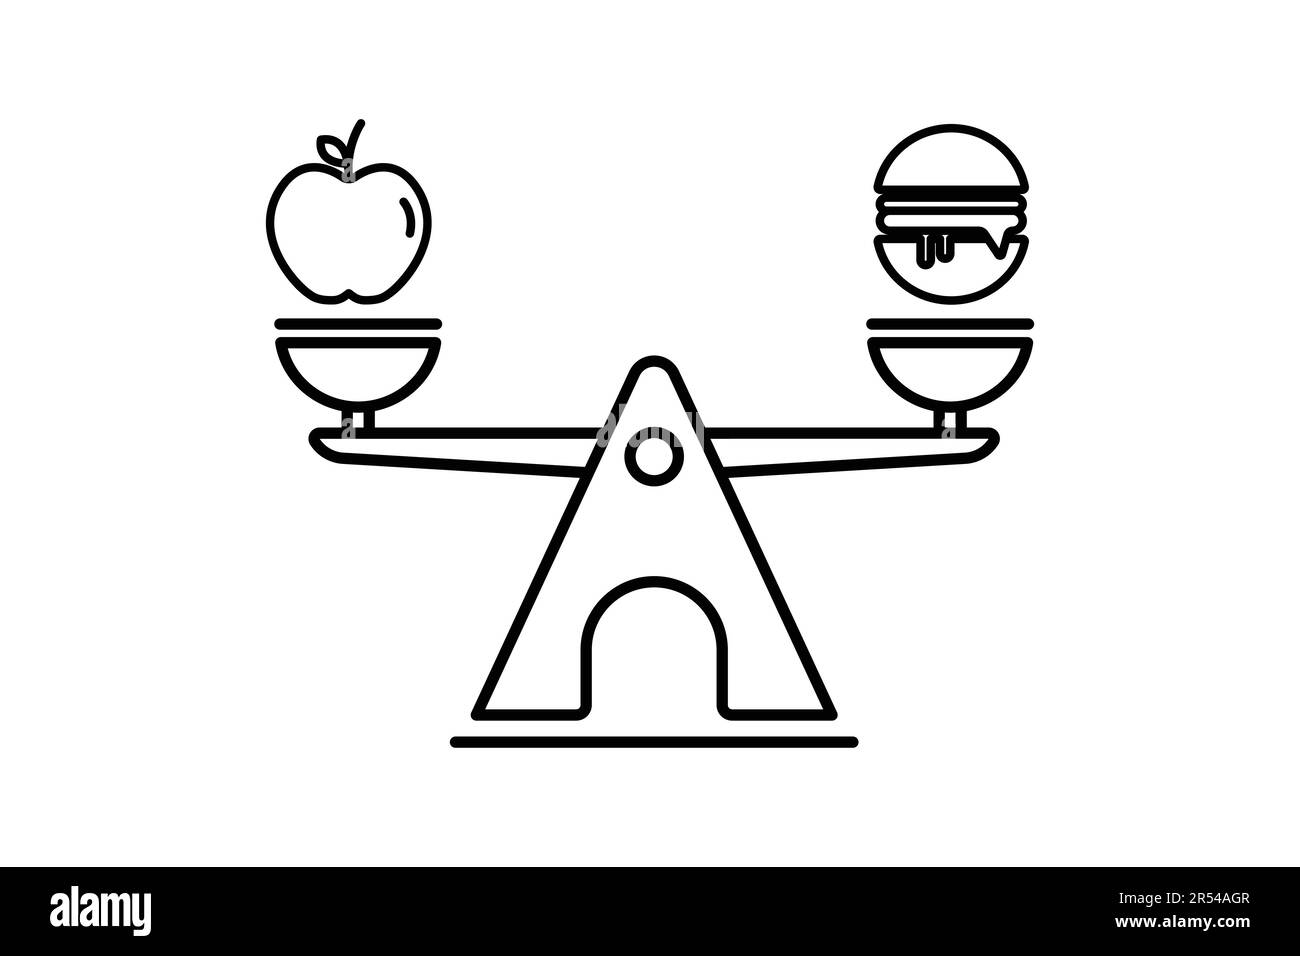 balanced diet icon. apples, burgers and scales. icon related to wellness, healthy. Line icon style design. Simple vector design editable Stock Vector